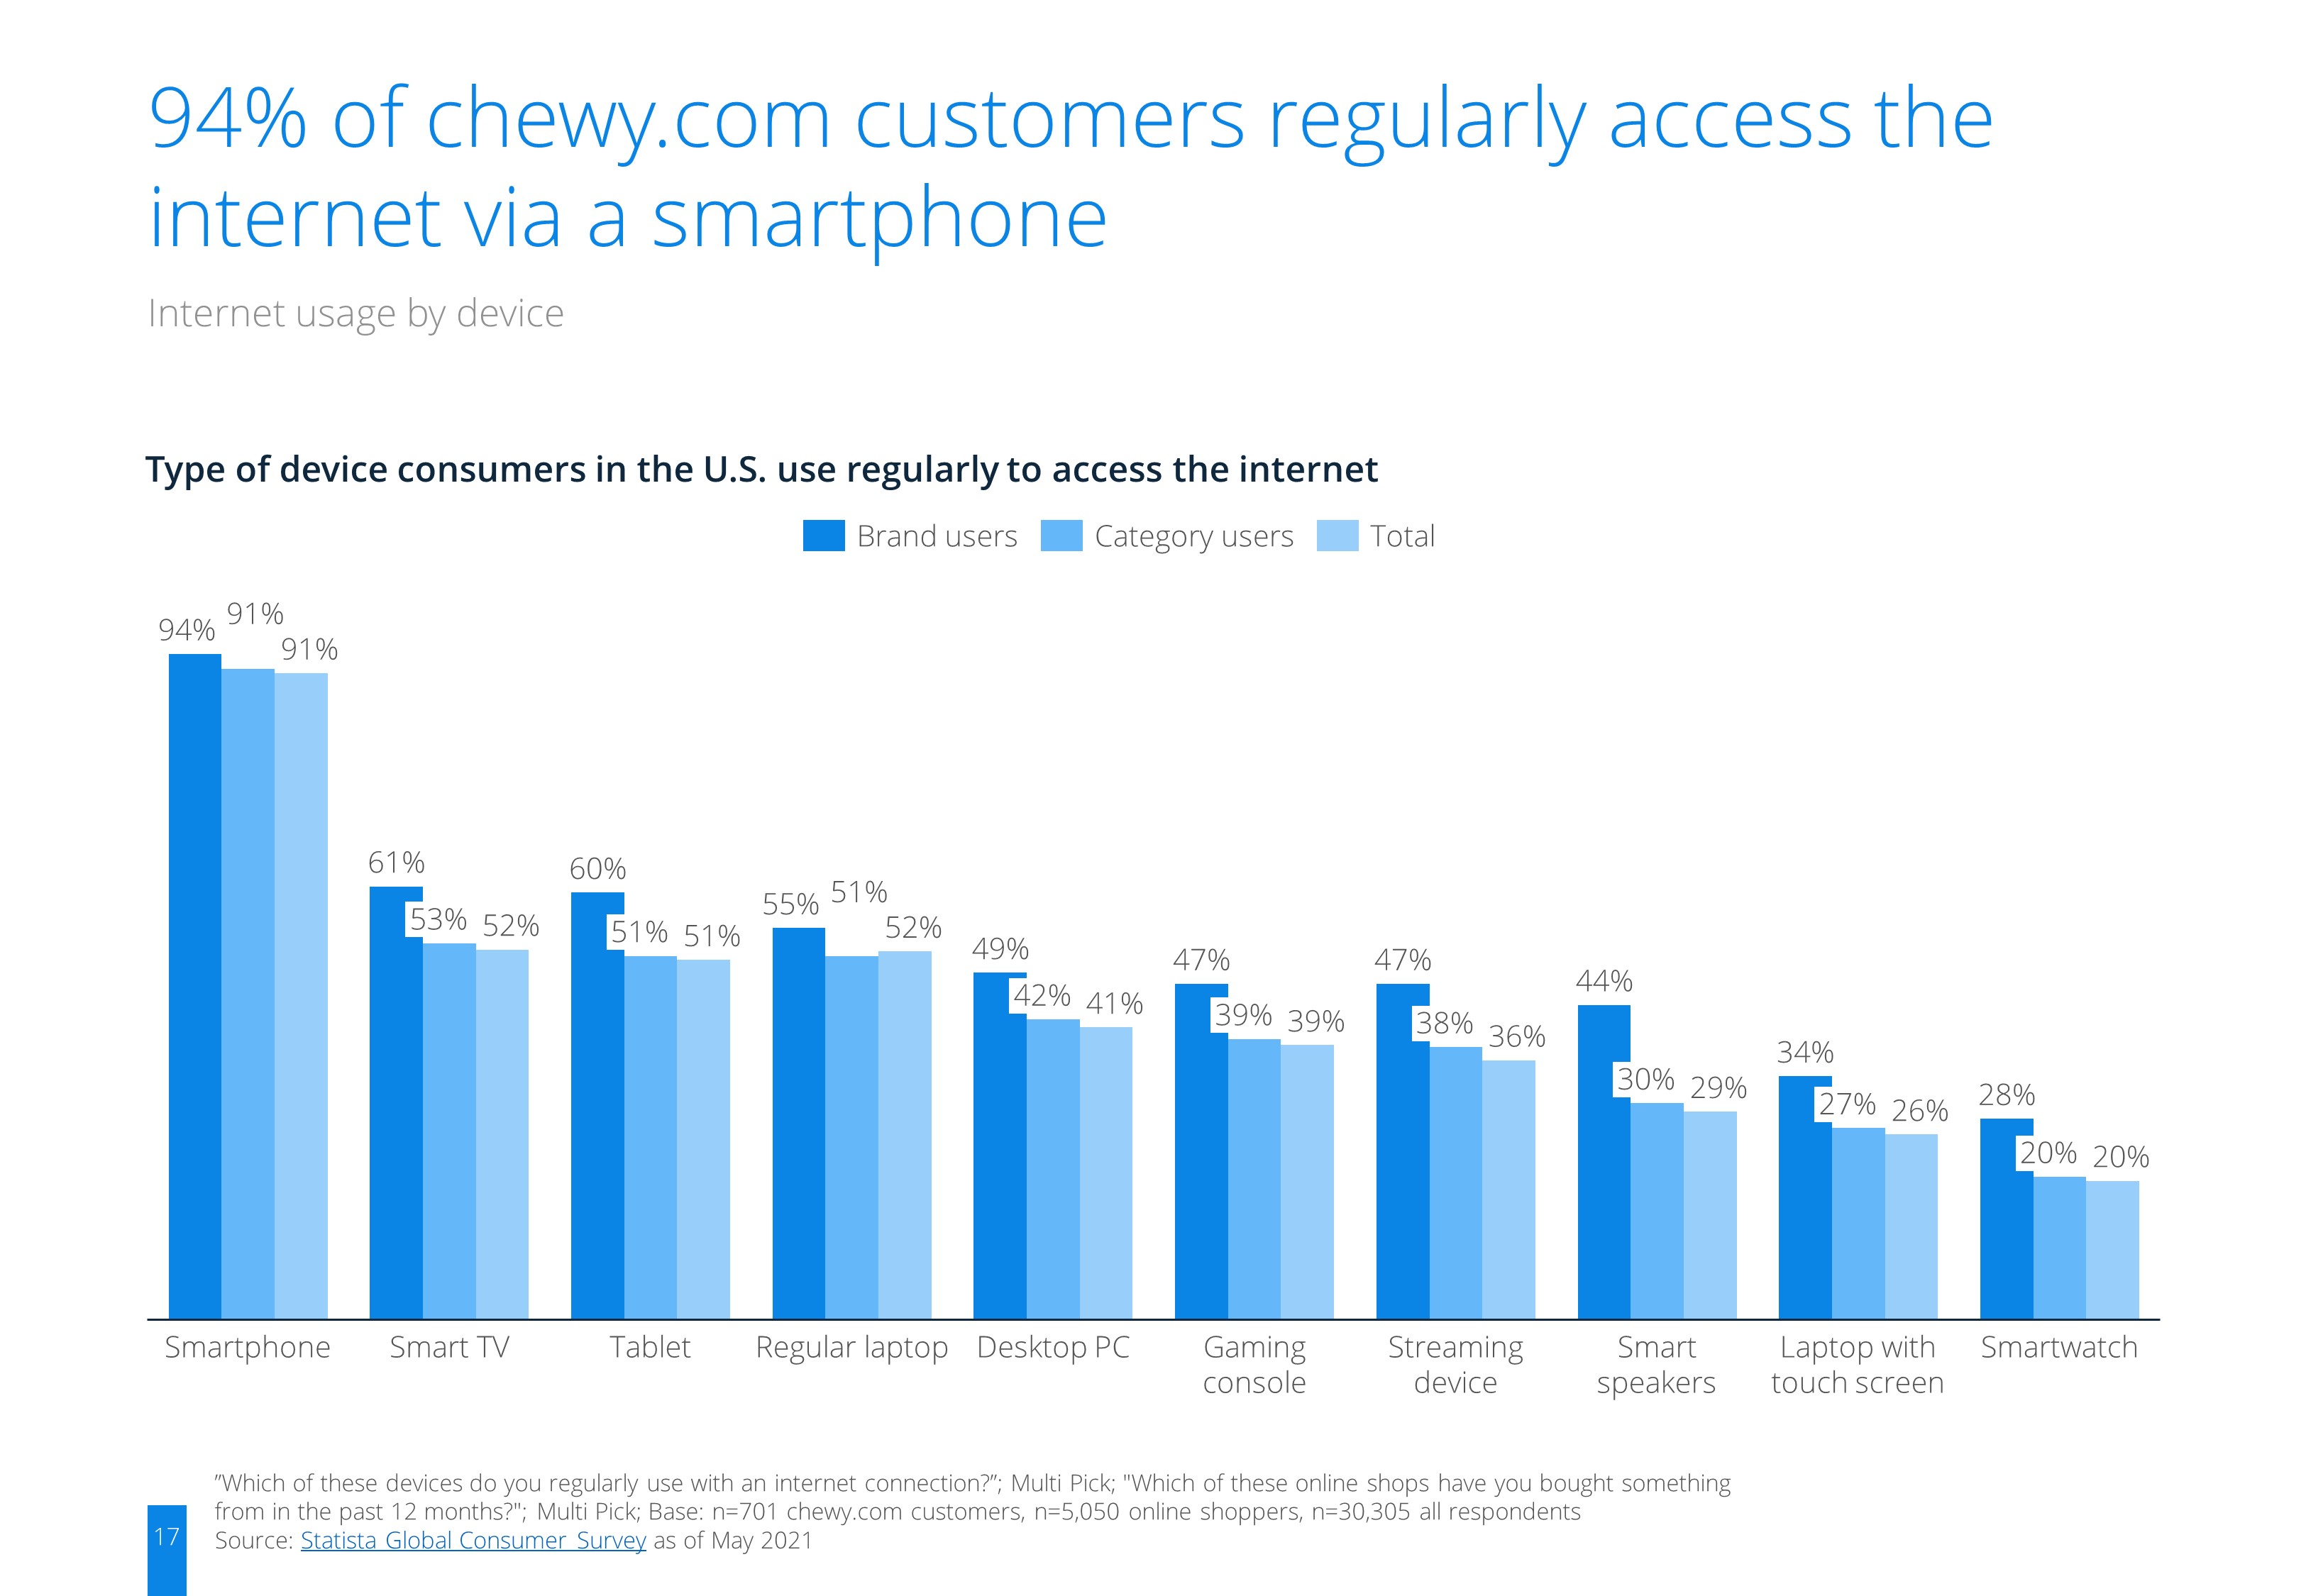 ecommerceDB Infographic: ecommerce_chewy.com_Brand_Report_United States_2021_3.jpg